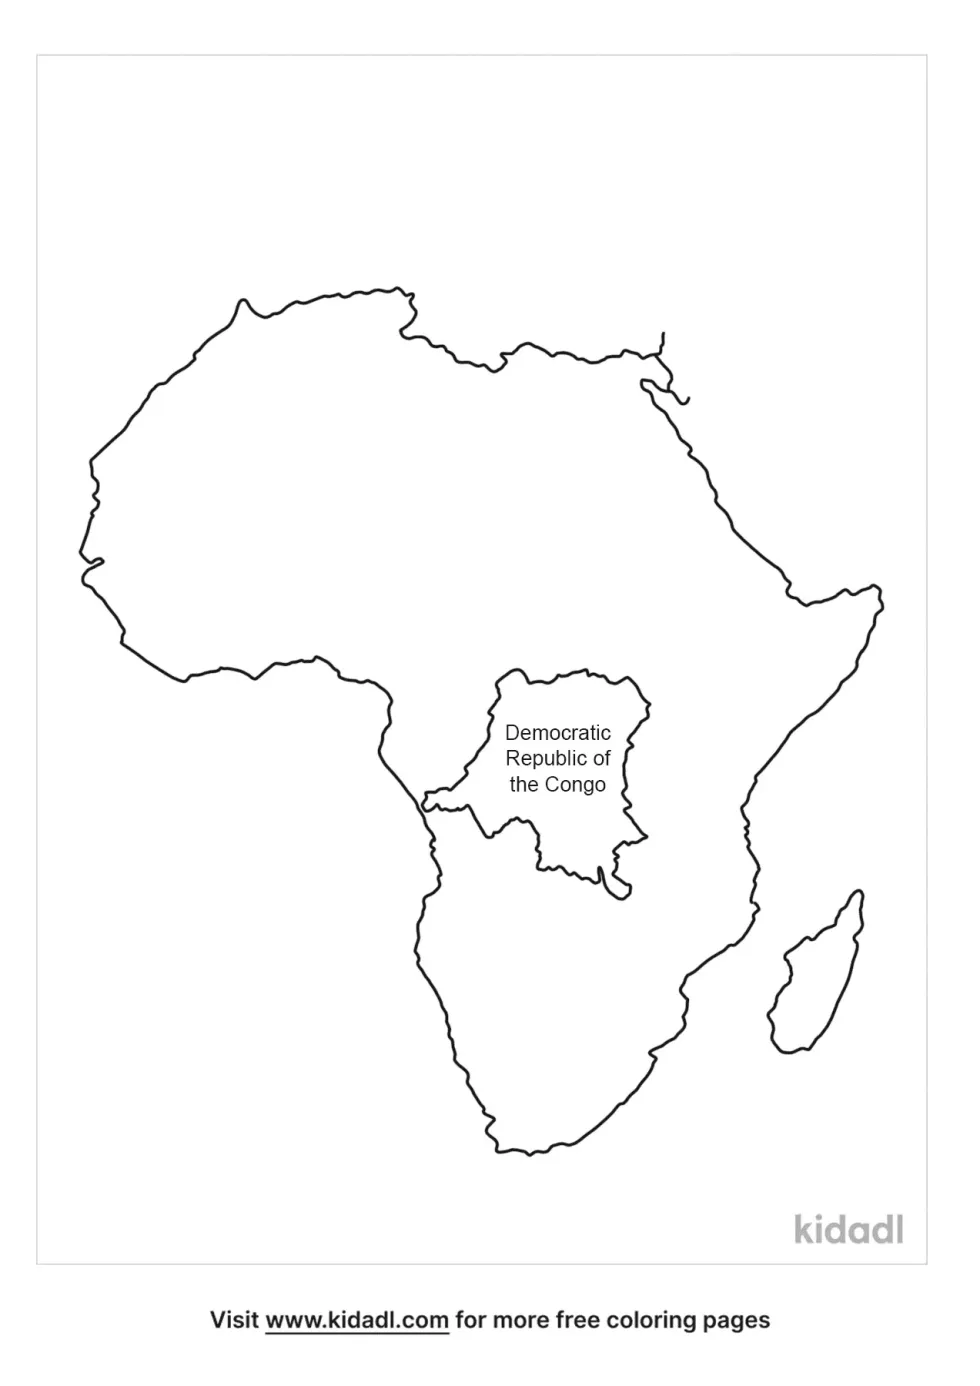 African Continent With Democratic Republic Of The Congo Highlighted